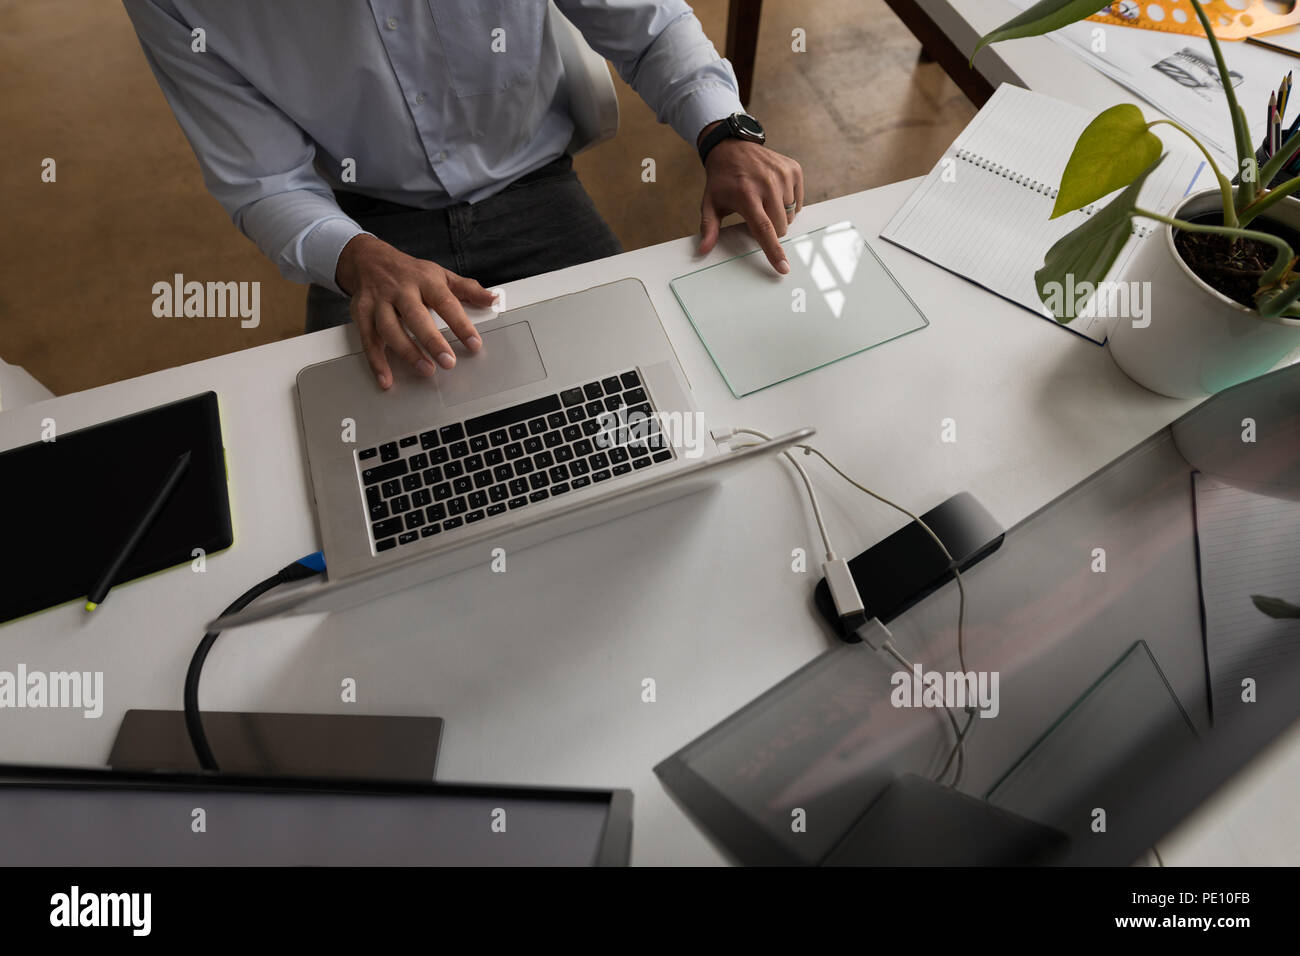 Businessman using glass digital tablet while working on laptop Stock Photo